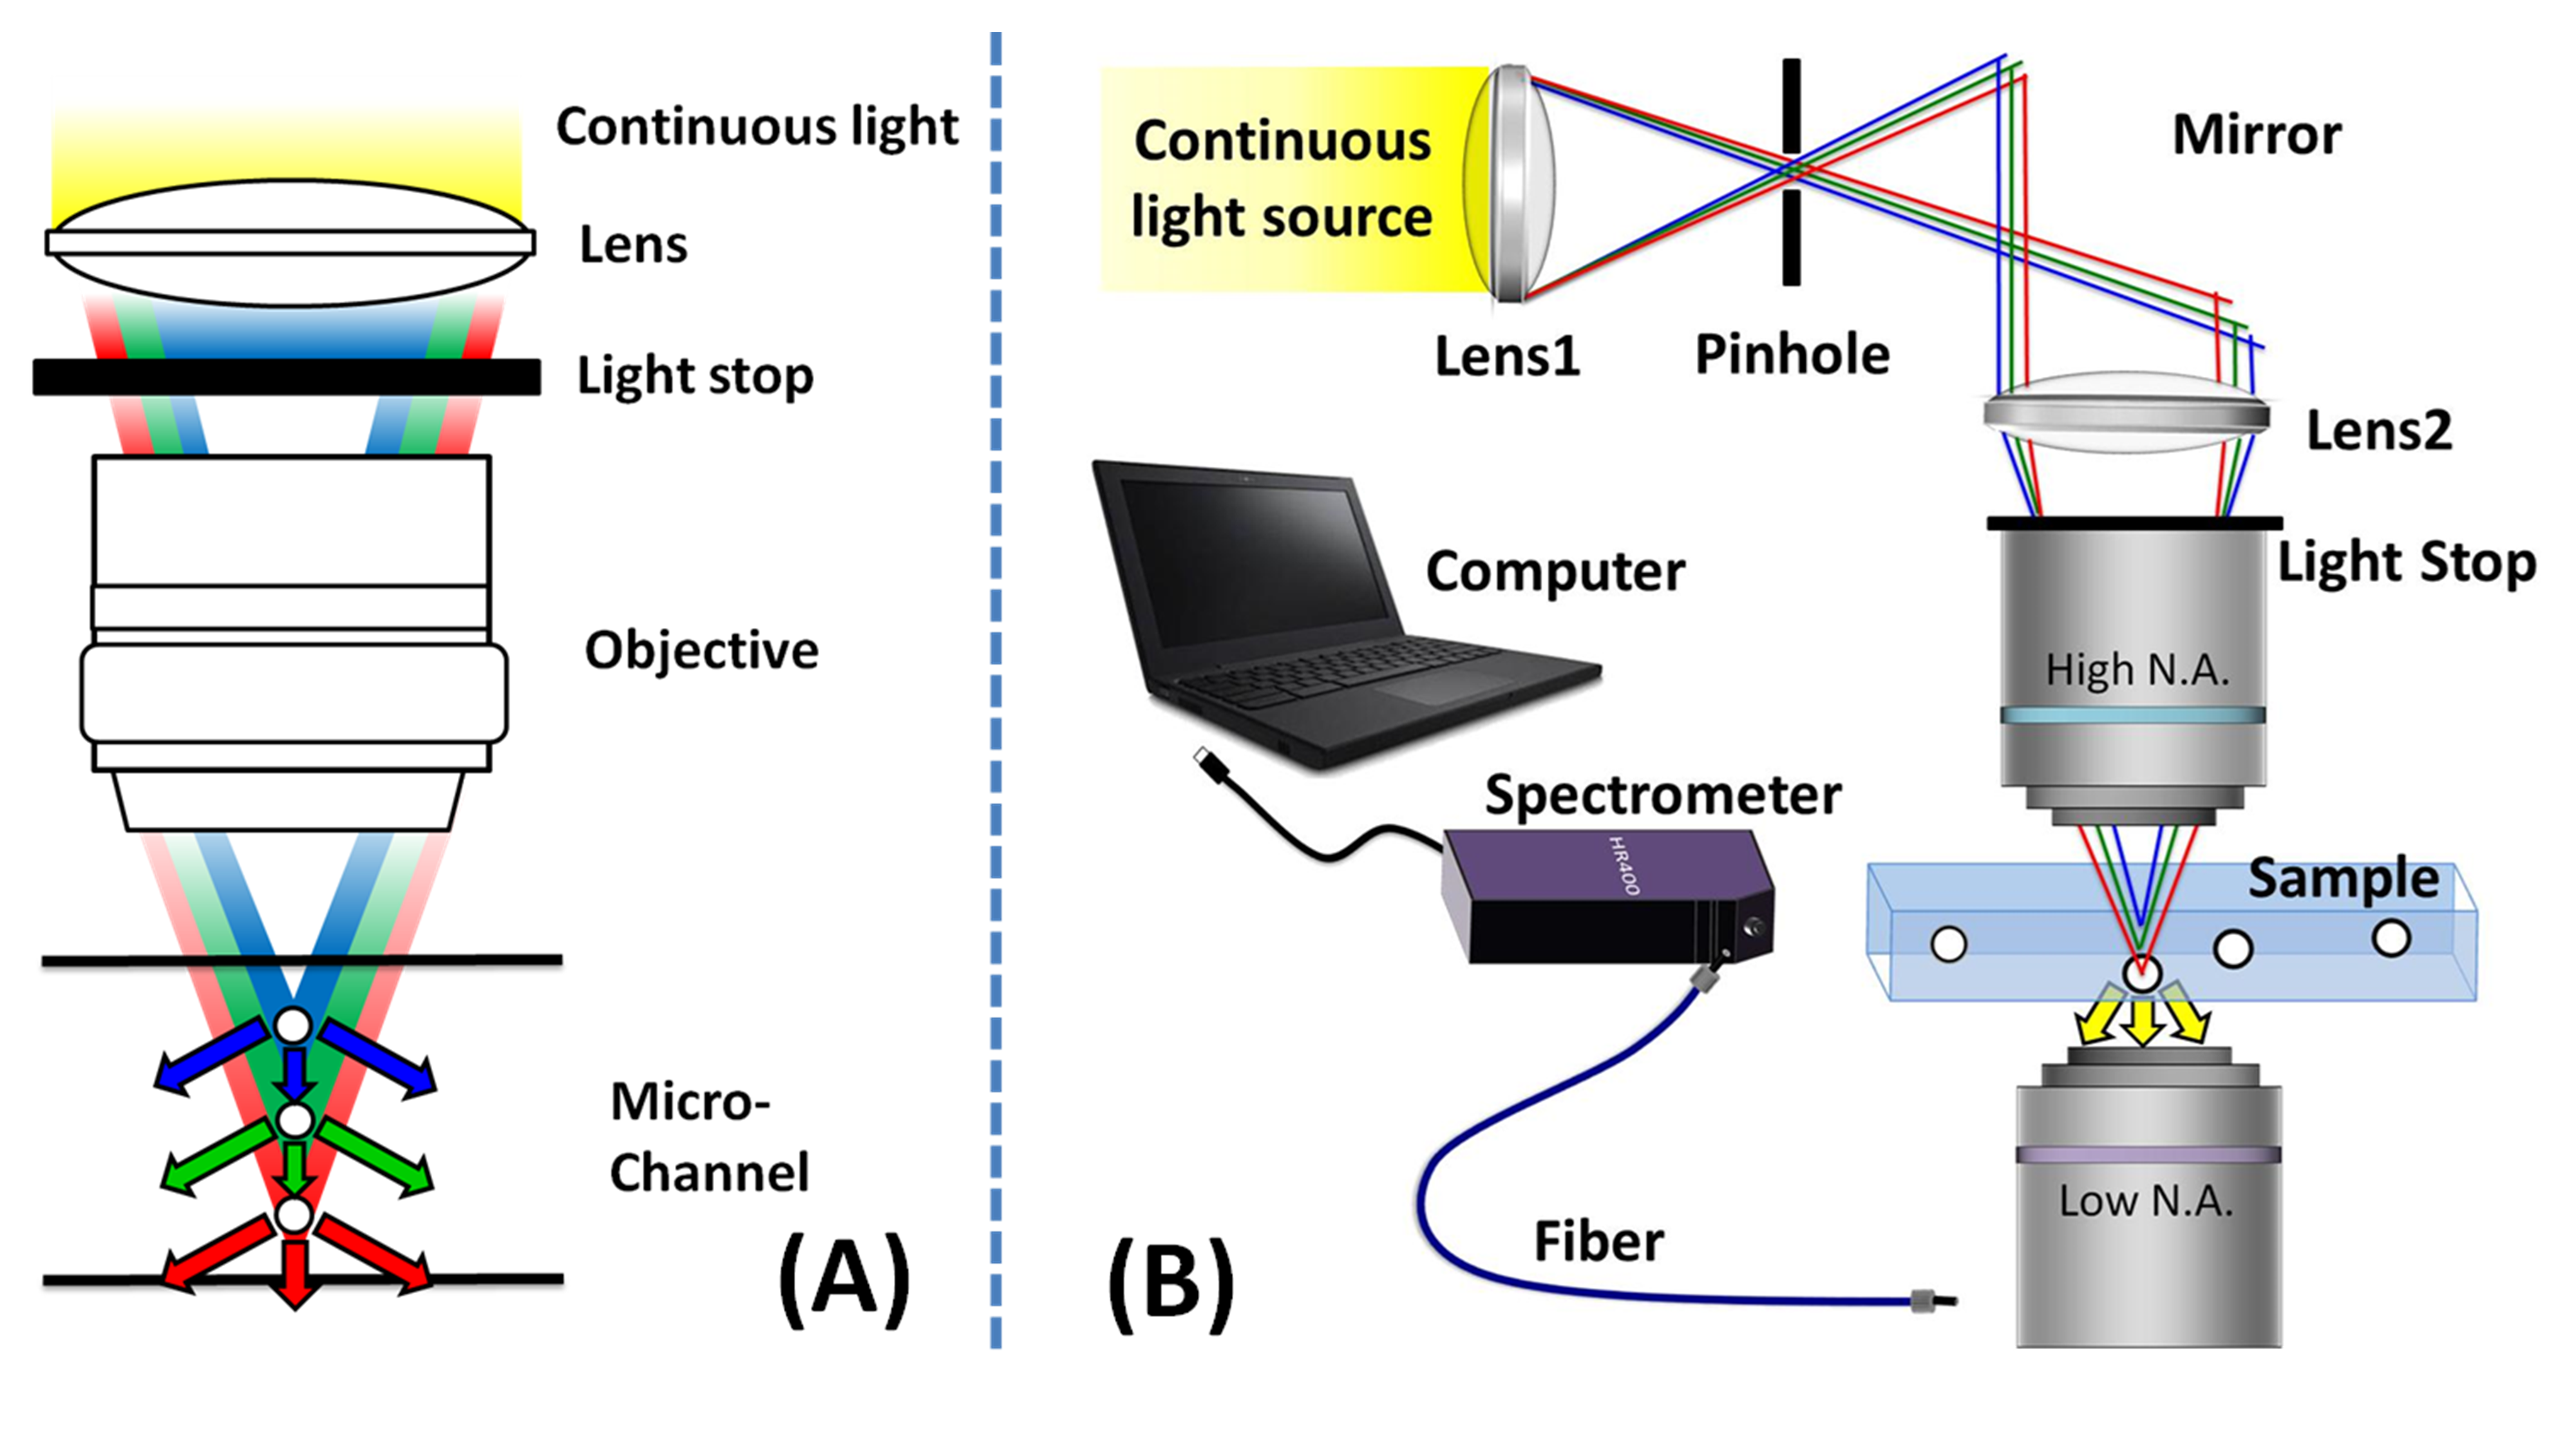 Figure 3 (A) Basic concept of particle depth detection by means of the chromatic aberration effect. (B) Schematic illustration of the experimental measurement system. Note that a low Abbe number acrylic glass lens is used to disperse the white light (Lens 1), a high N.A. objective lens is used to condense the dispersed light, and a low N.A. objective lens is used to collect the scattered light. [5]